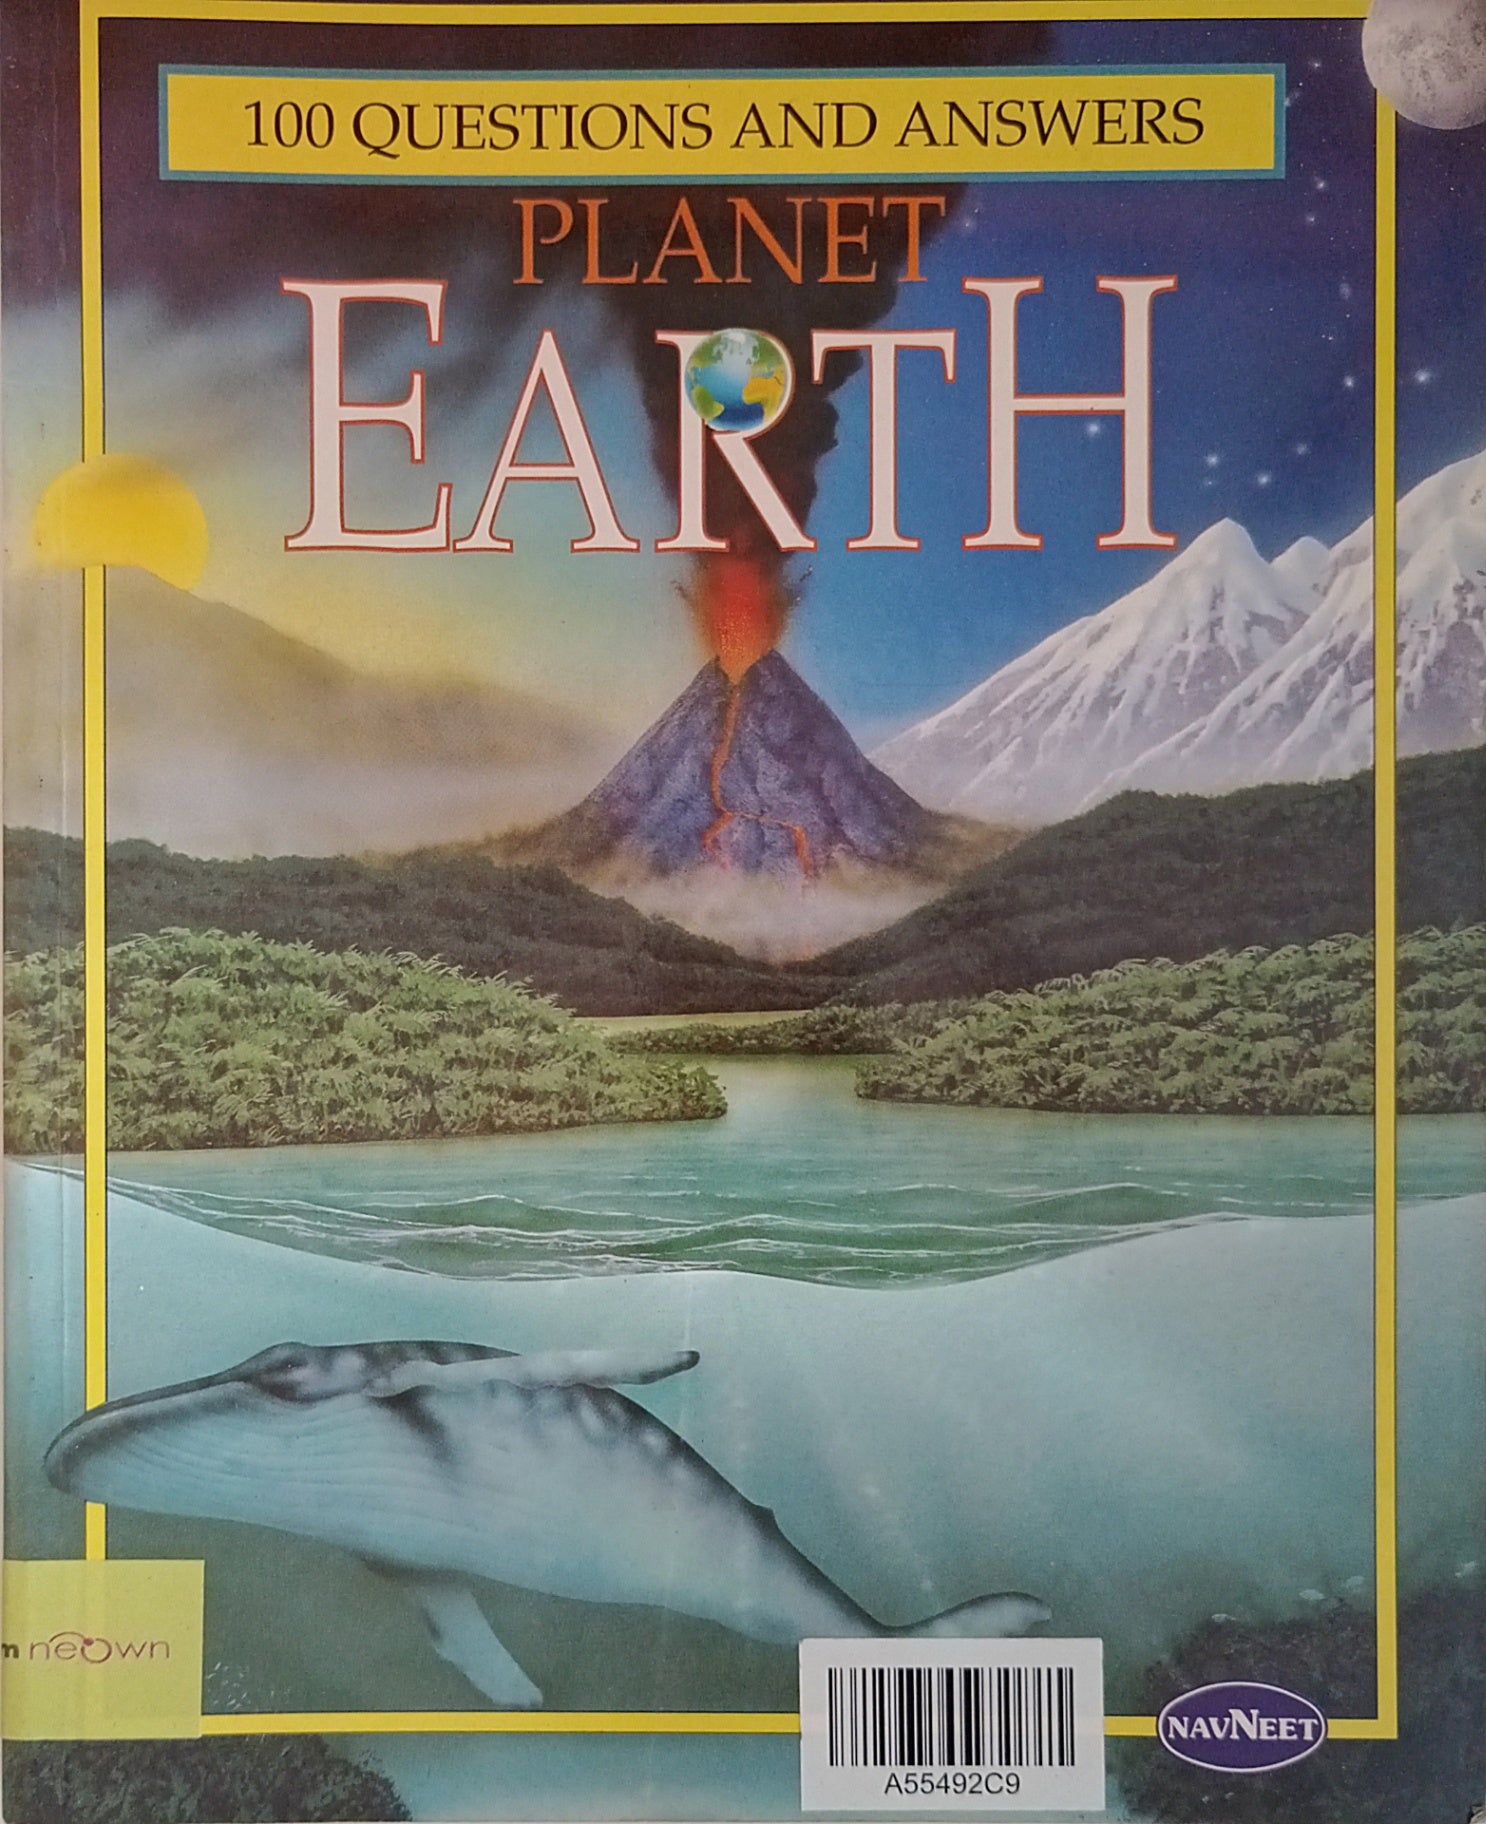 100 Questions and Answers Planet Earth